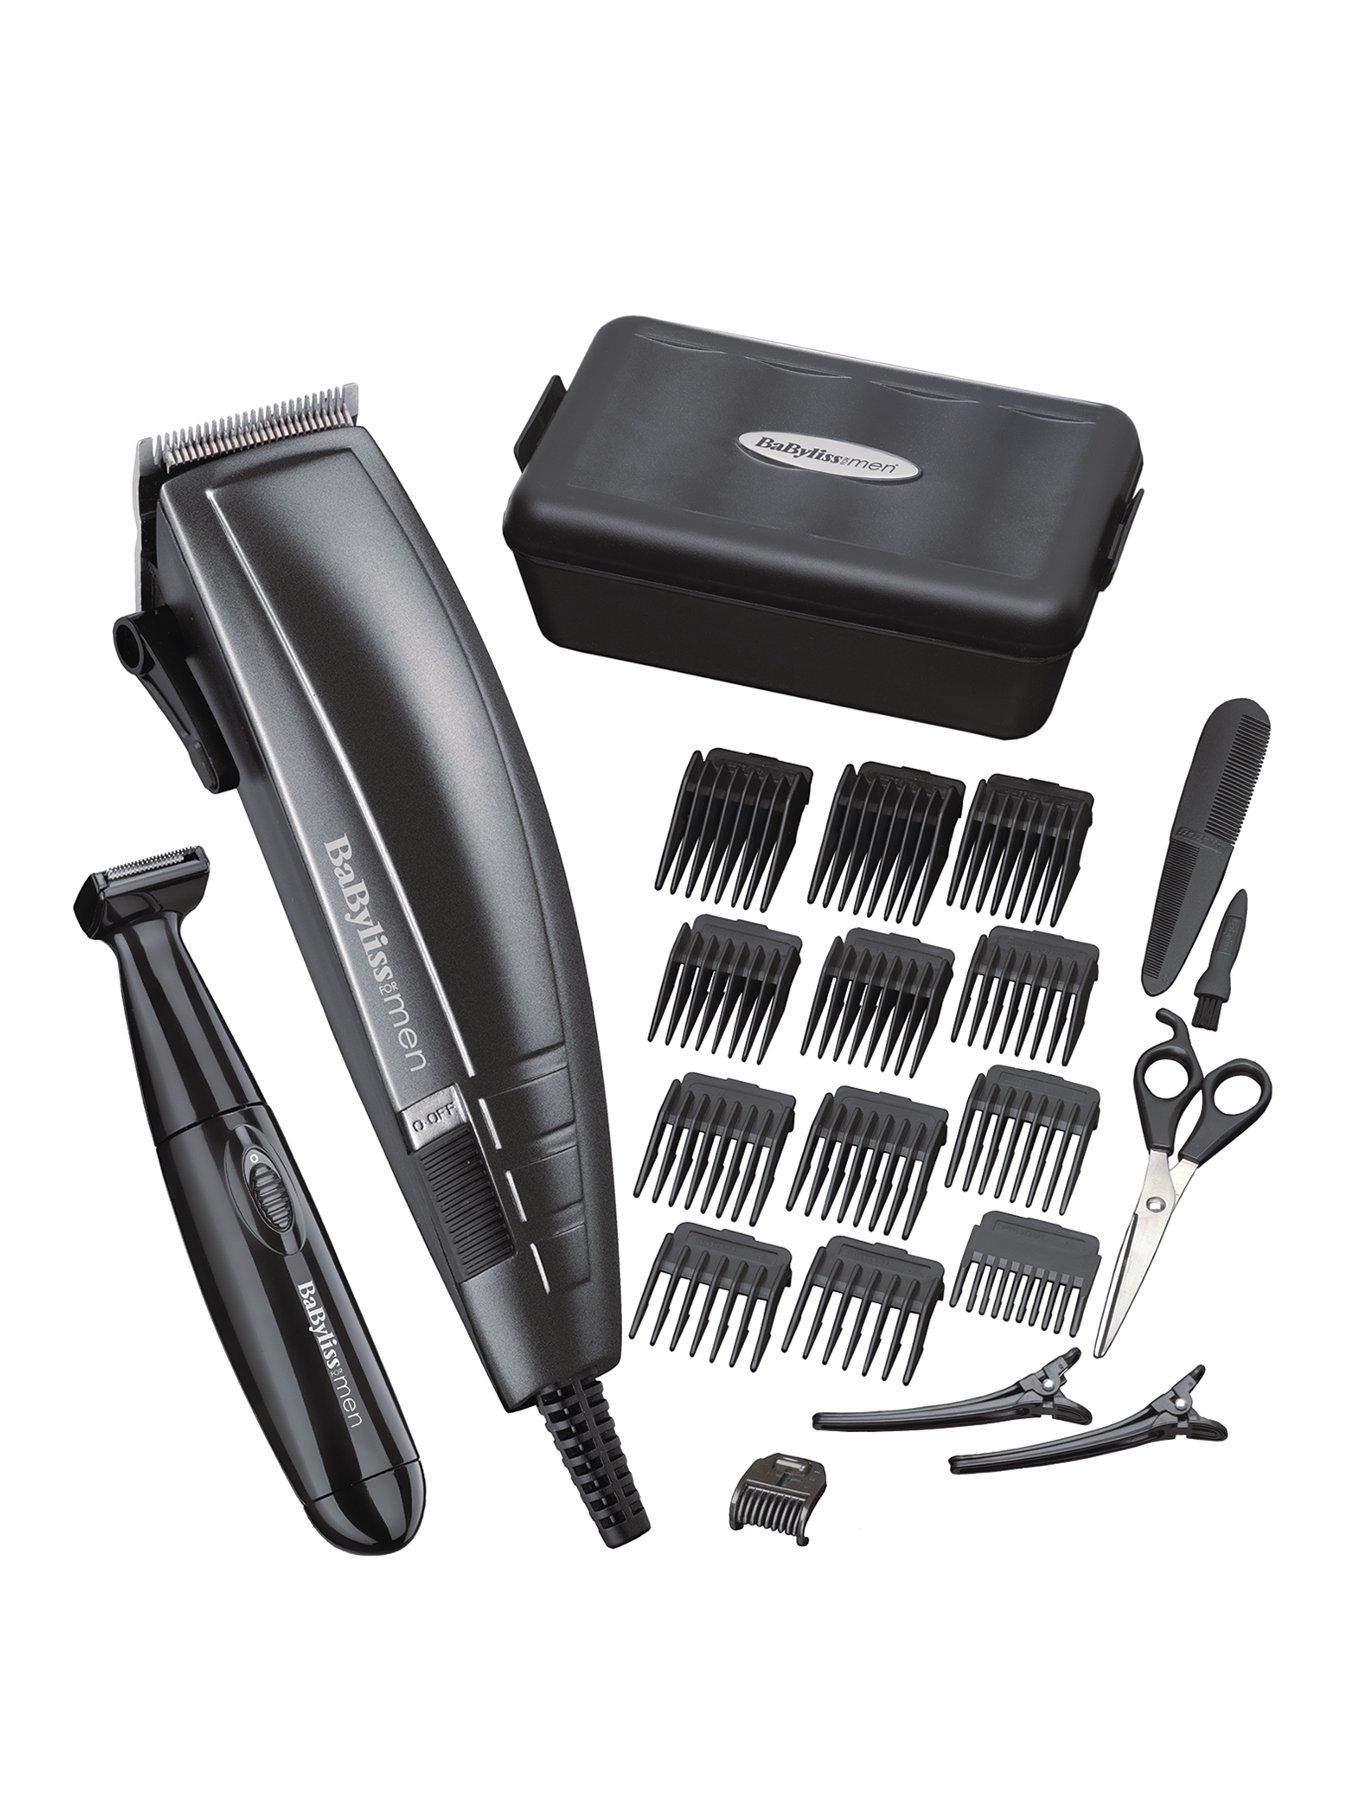 babyliss power pro hair clippers